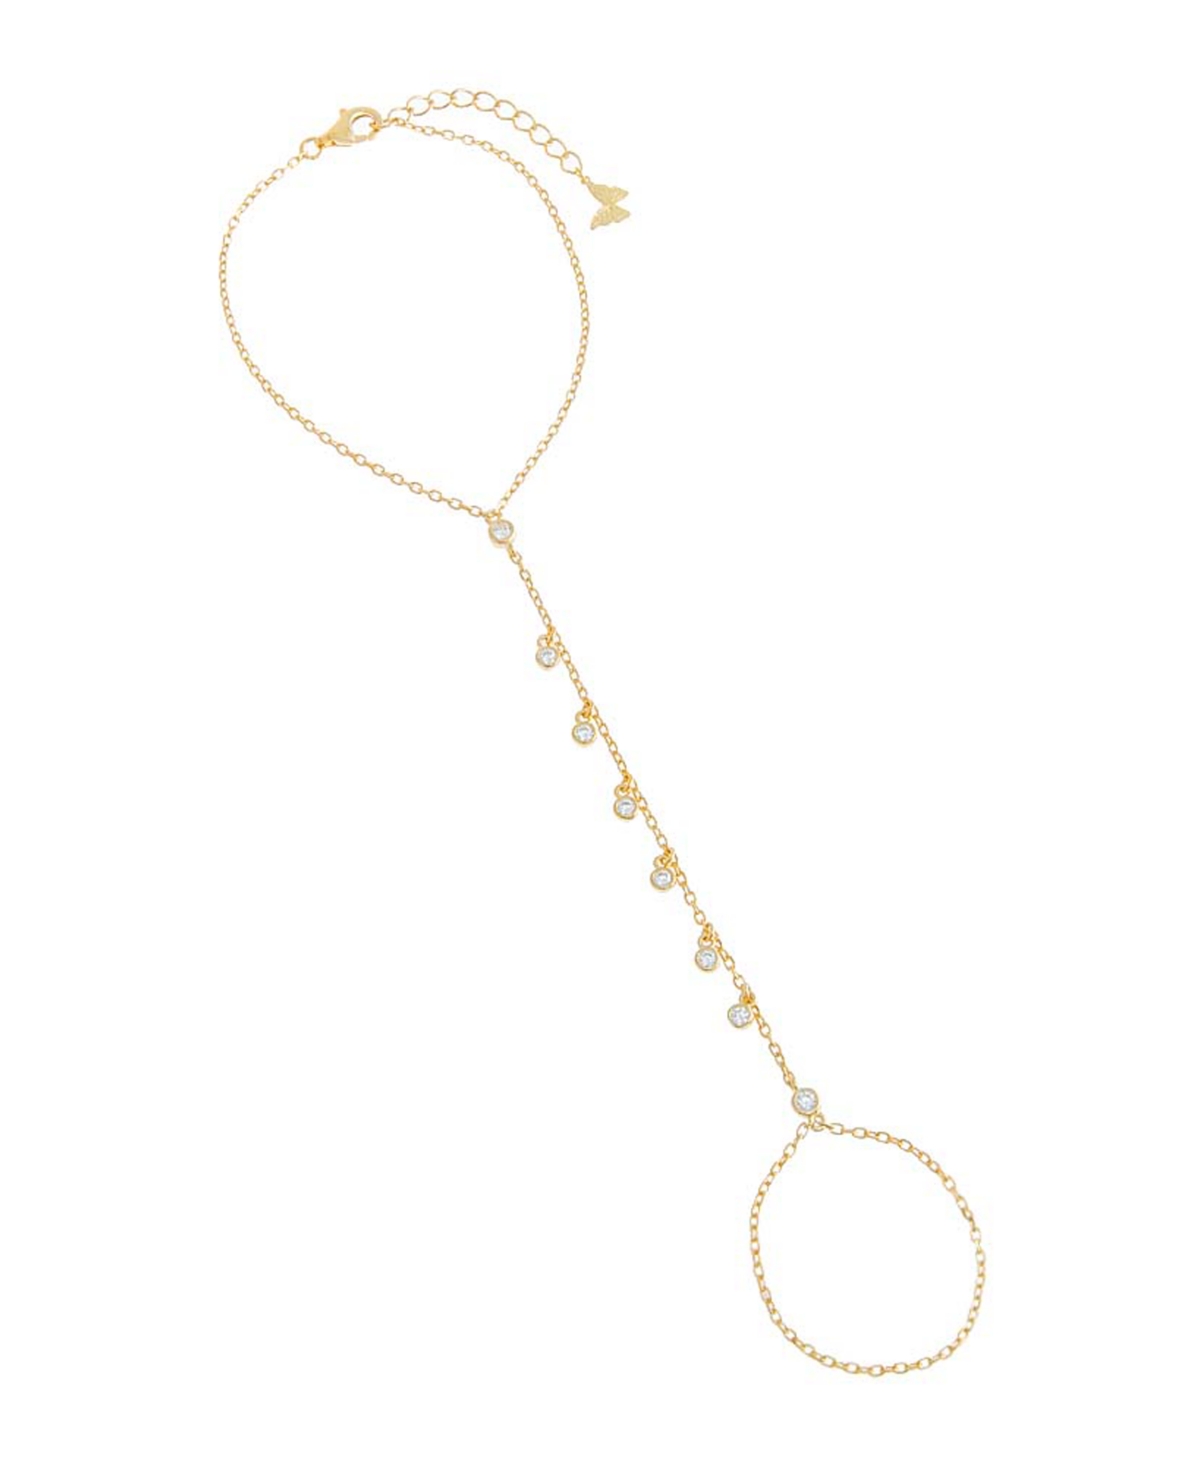 By Adina Eden 14k Gold-plated Sterling Silver Shaky Color Cubic Zirconia Hand Chain Bracelet